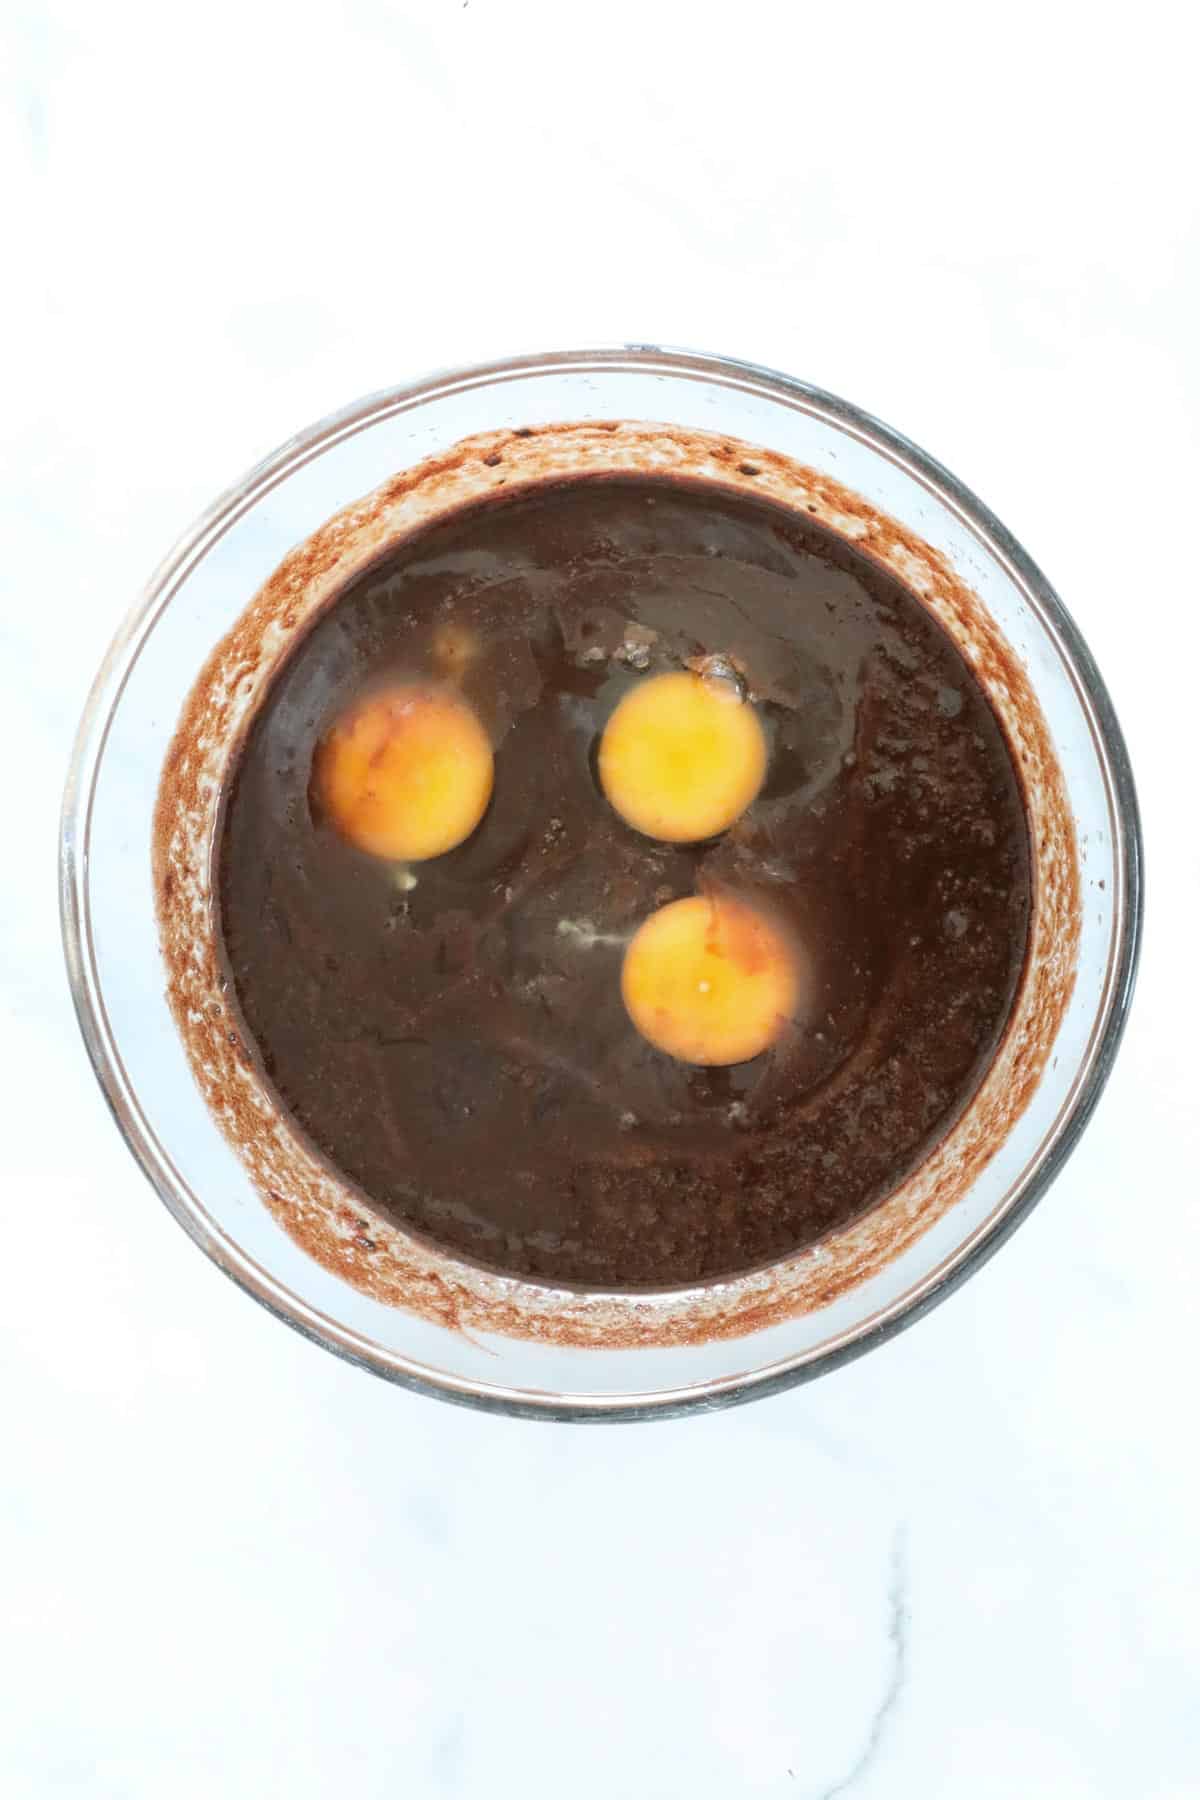 Eggs added to the brownie batter.